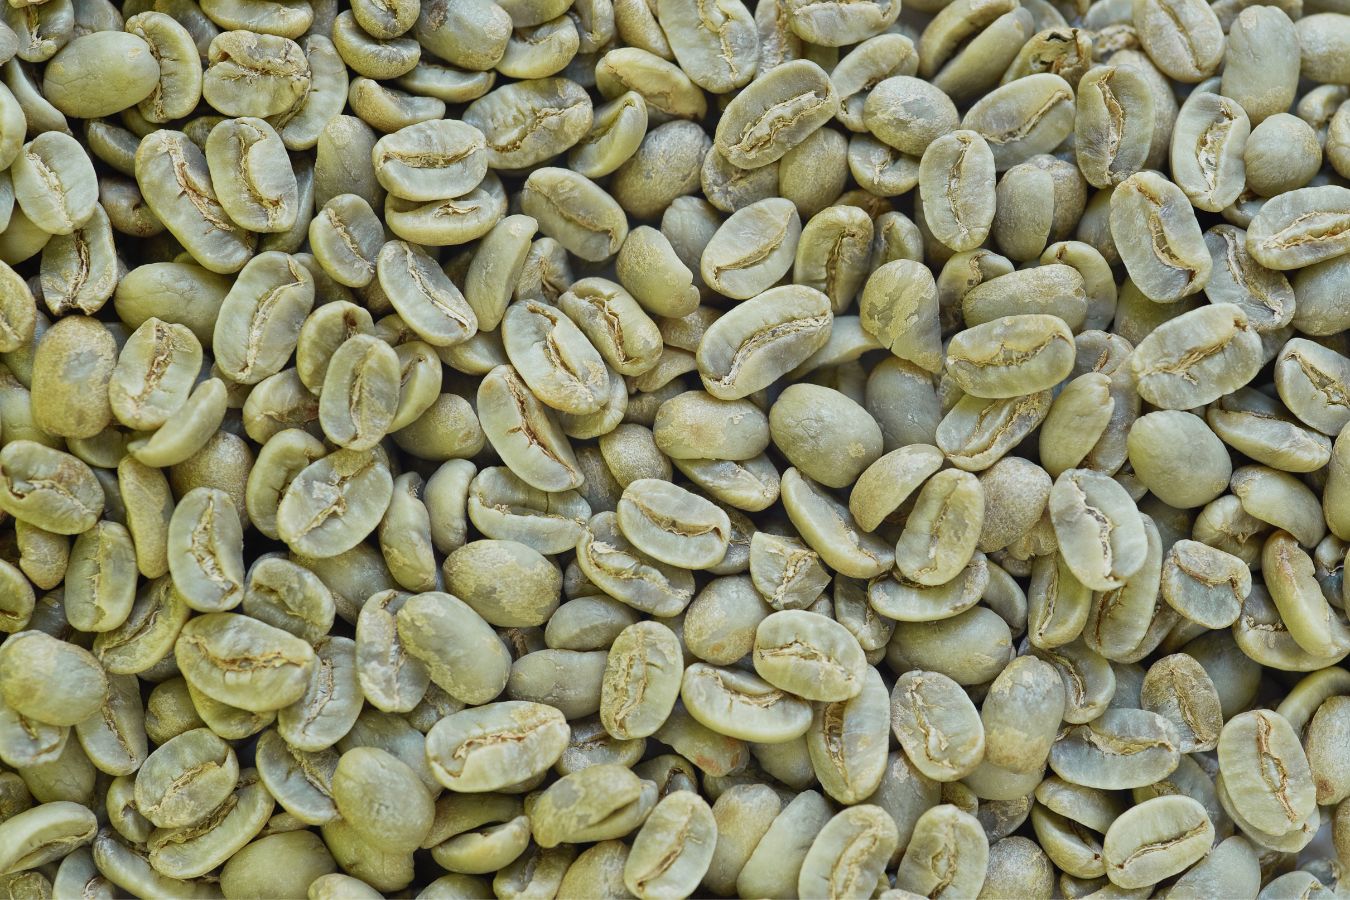 What Are Green Coffee Beans (Un-roasted Coffee)?